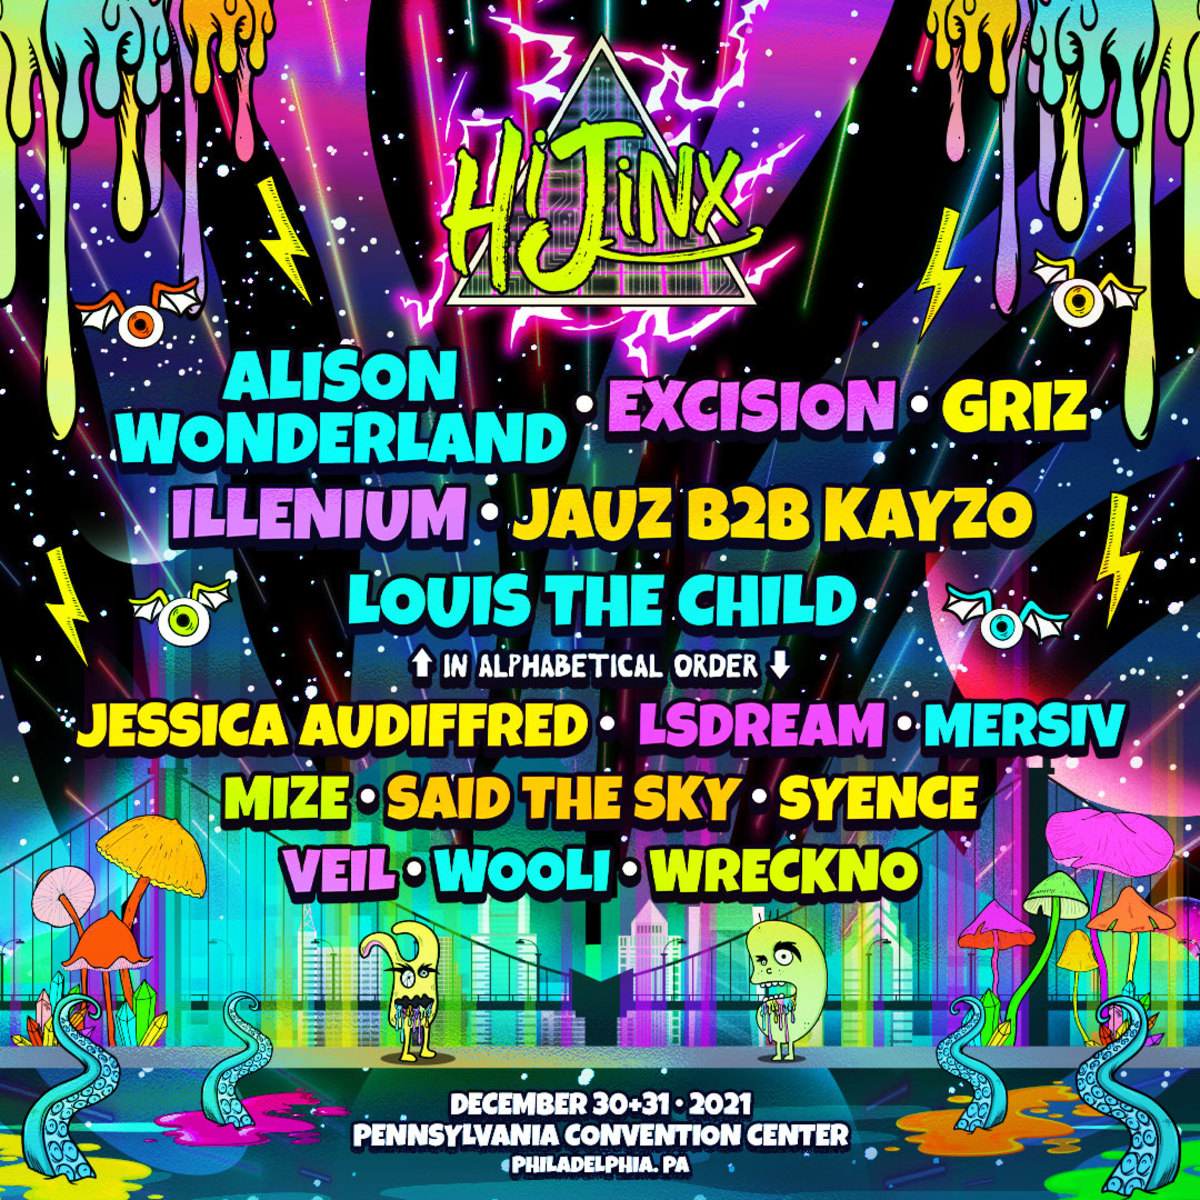 Flyer for the 2021 edition of the HiJinx music festival in Philadelphia.